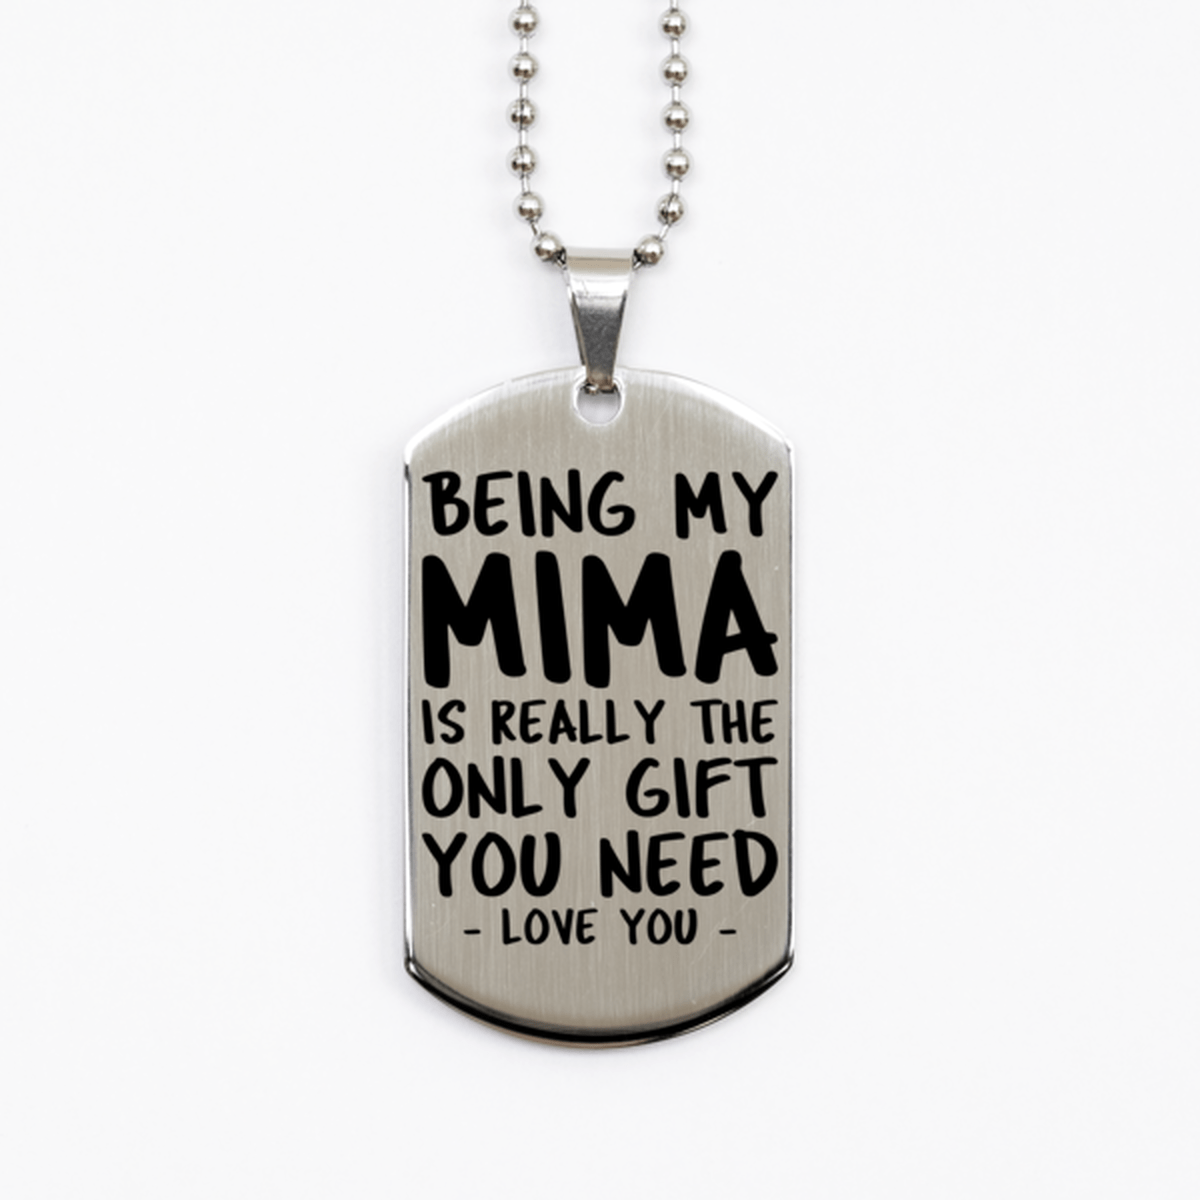 Funny Mima Silver Dog Tag Necklace, Being My Mima Is Really the Only Gift You Need, Best Birthday Gifts for Mima